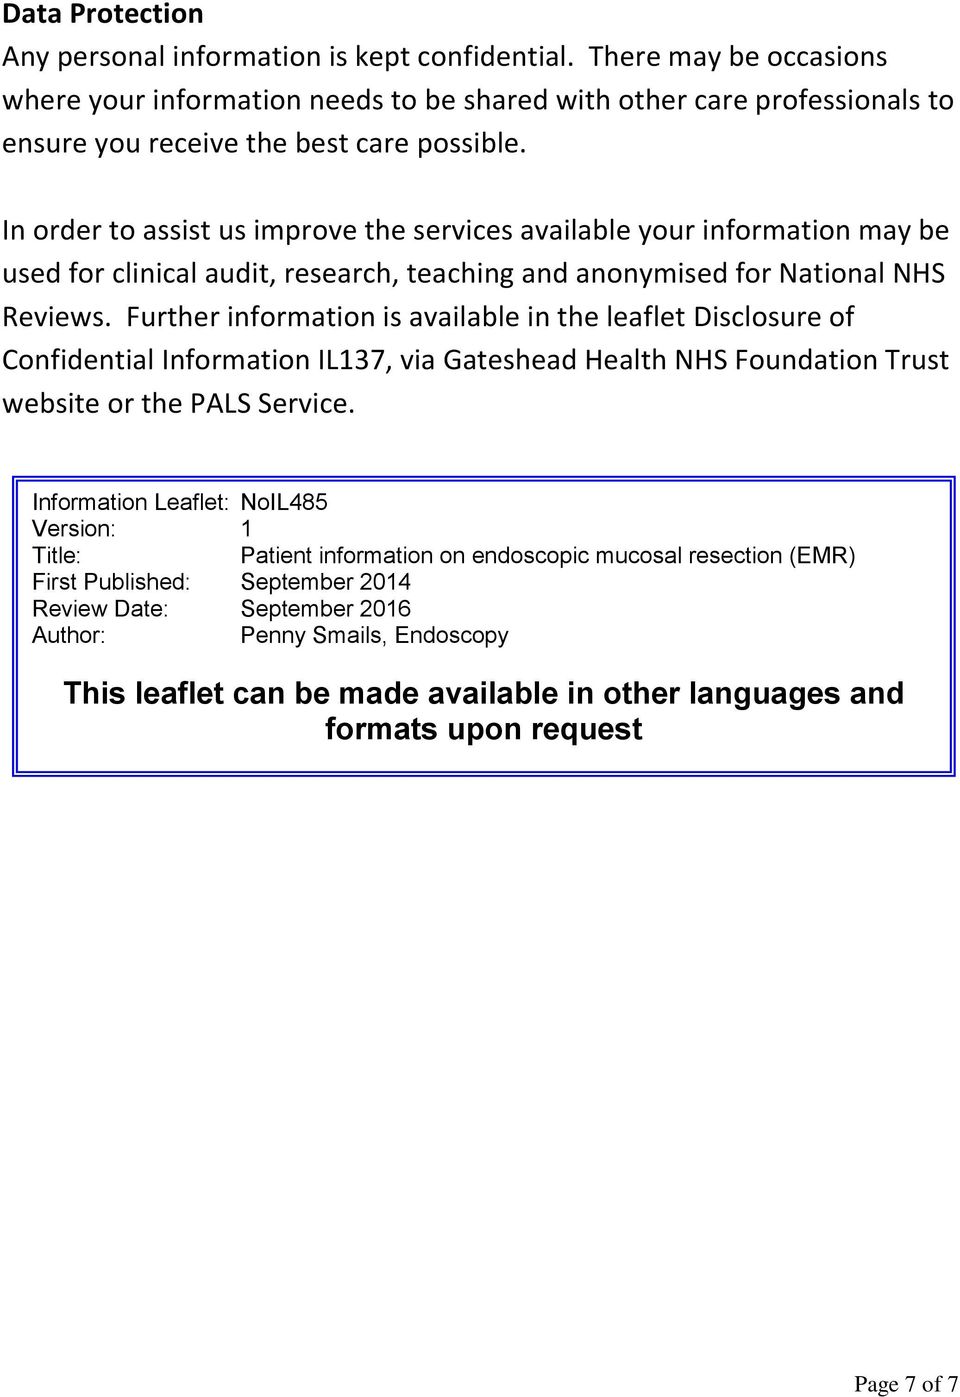 In order to assist us improve the services available your information may be used for clinical audit, research, teaching and anonymised for National NHS Reviews.